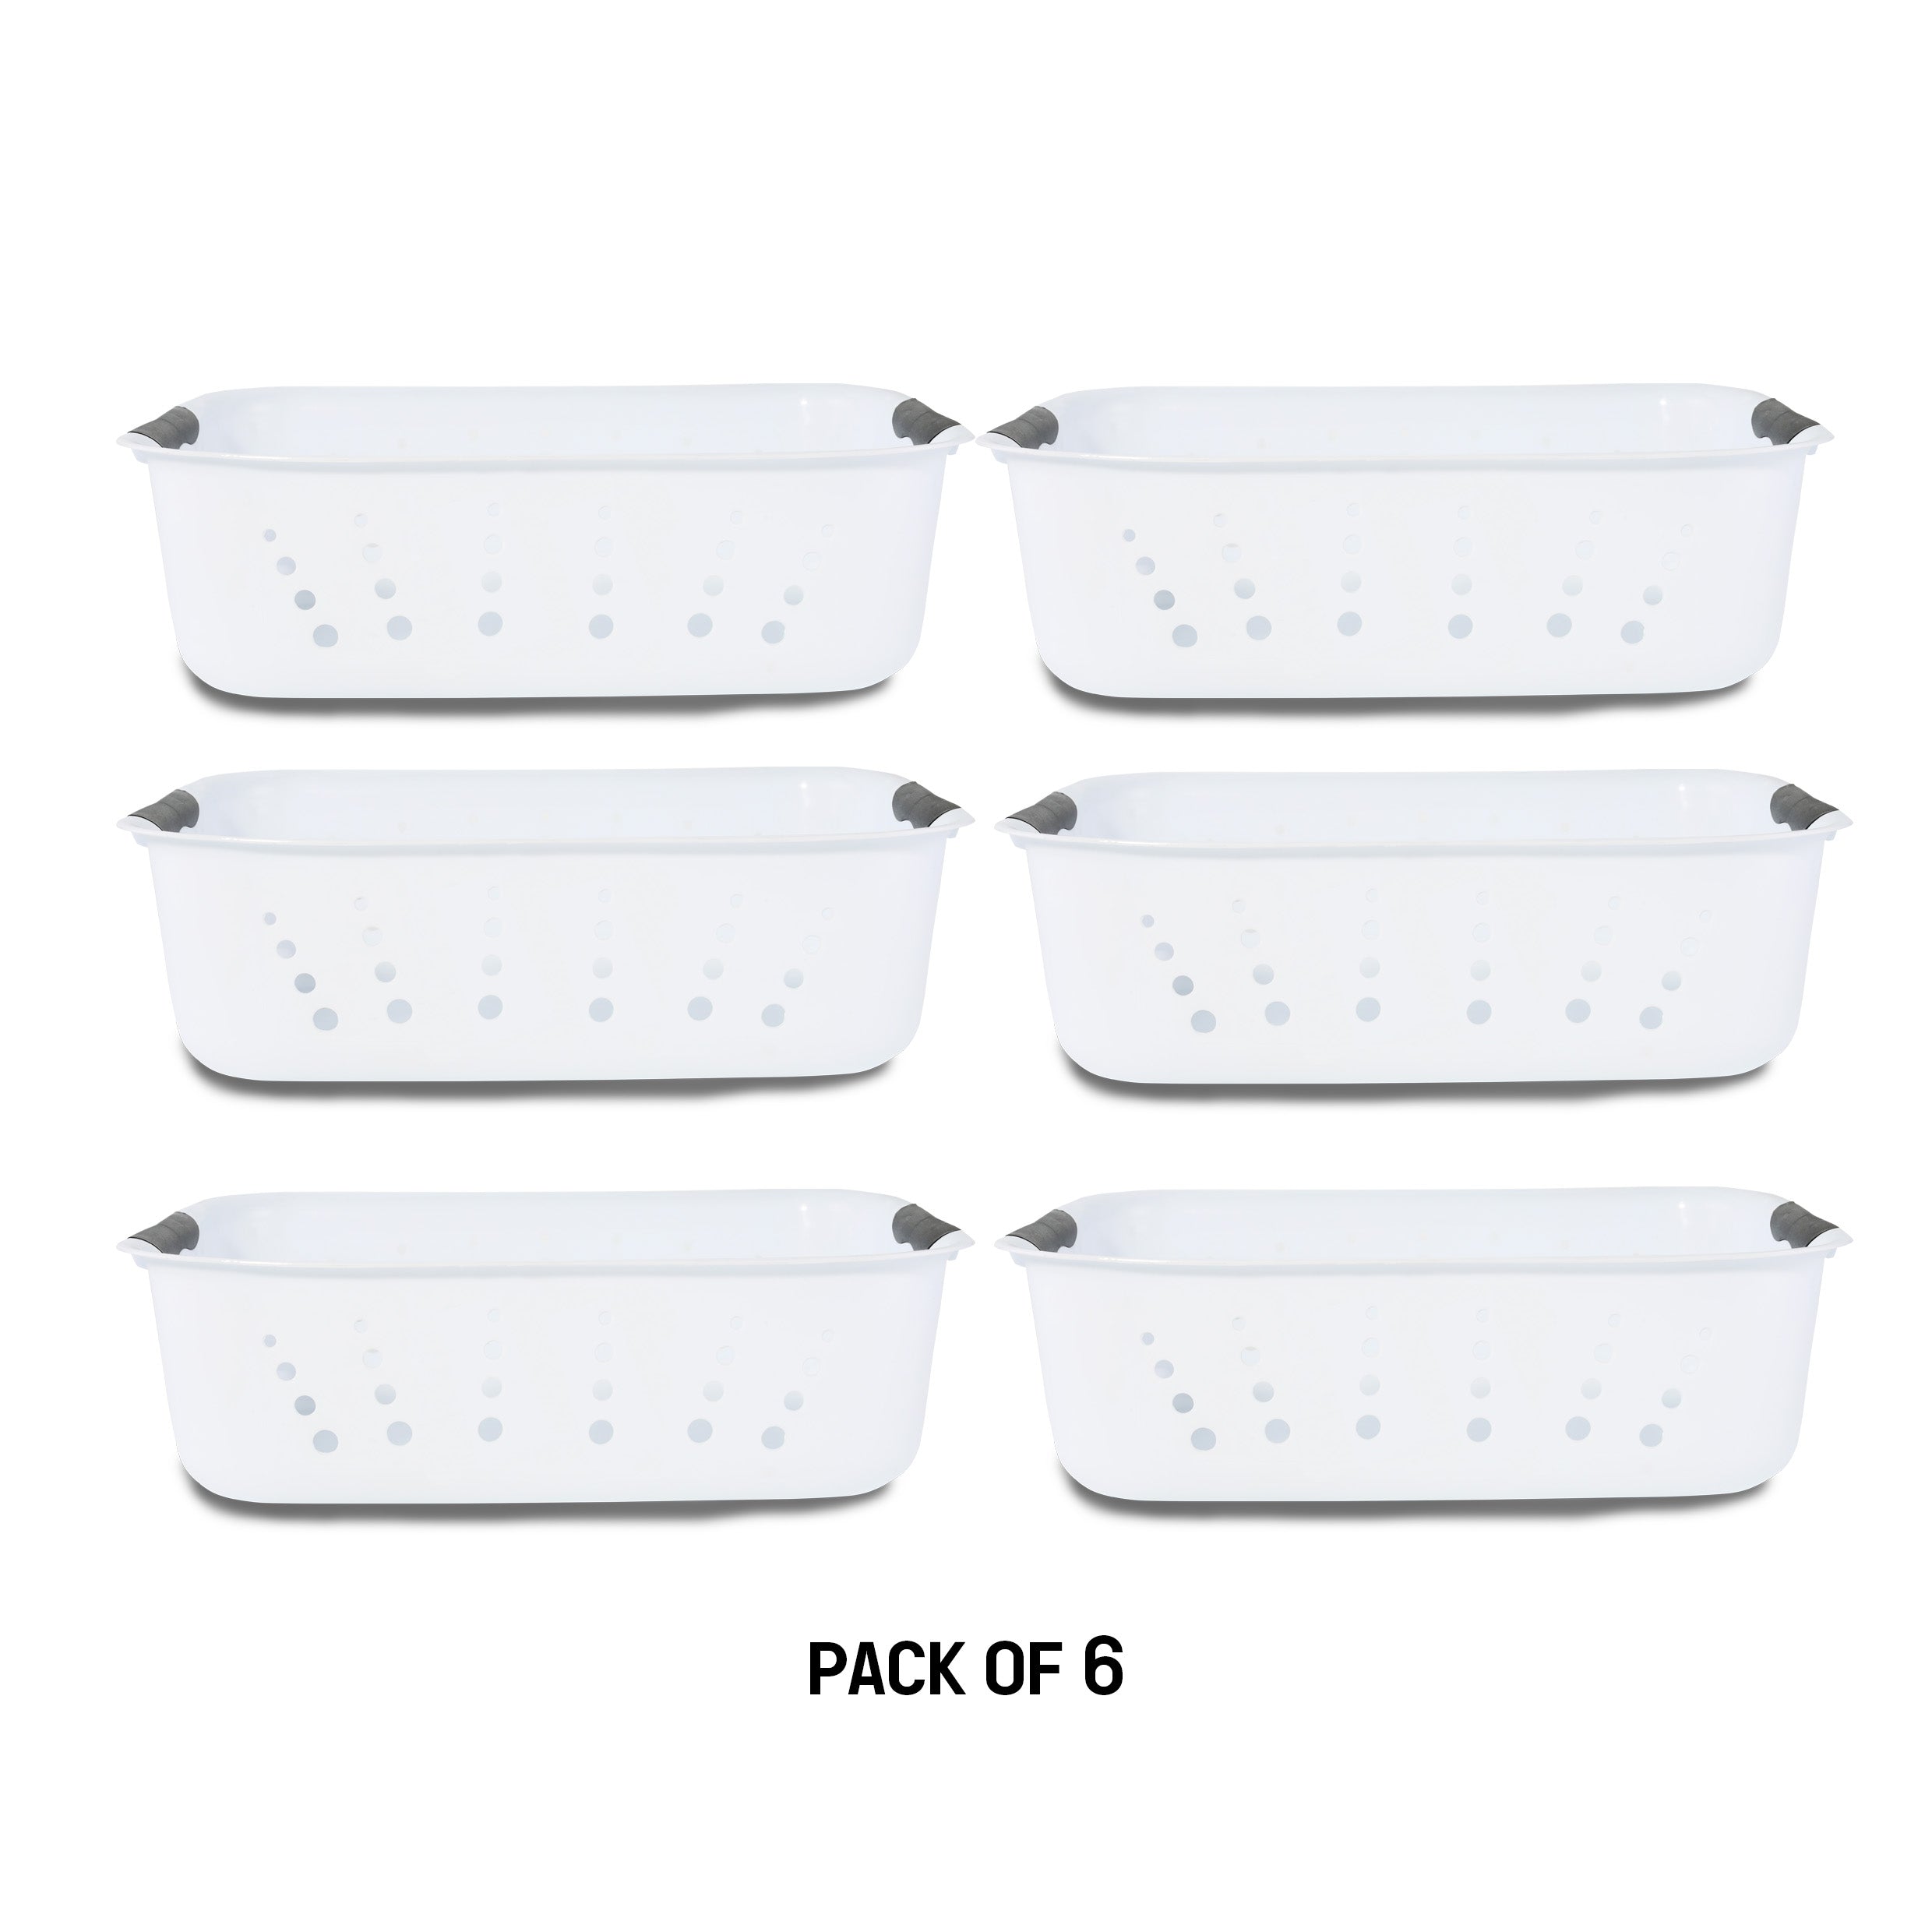 American Maid Basin, Pack of 6